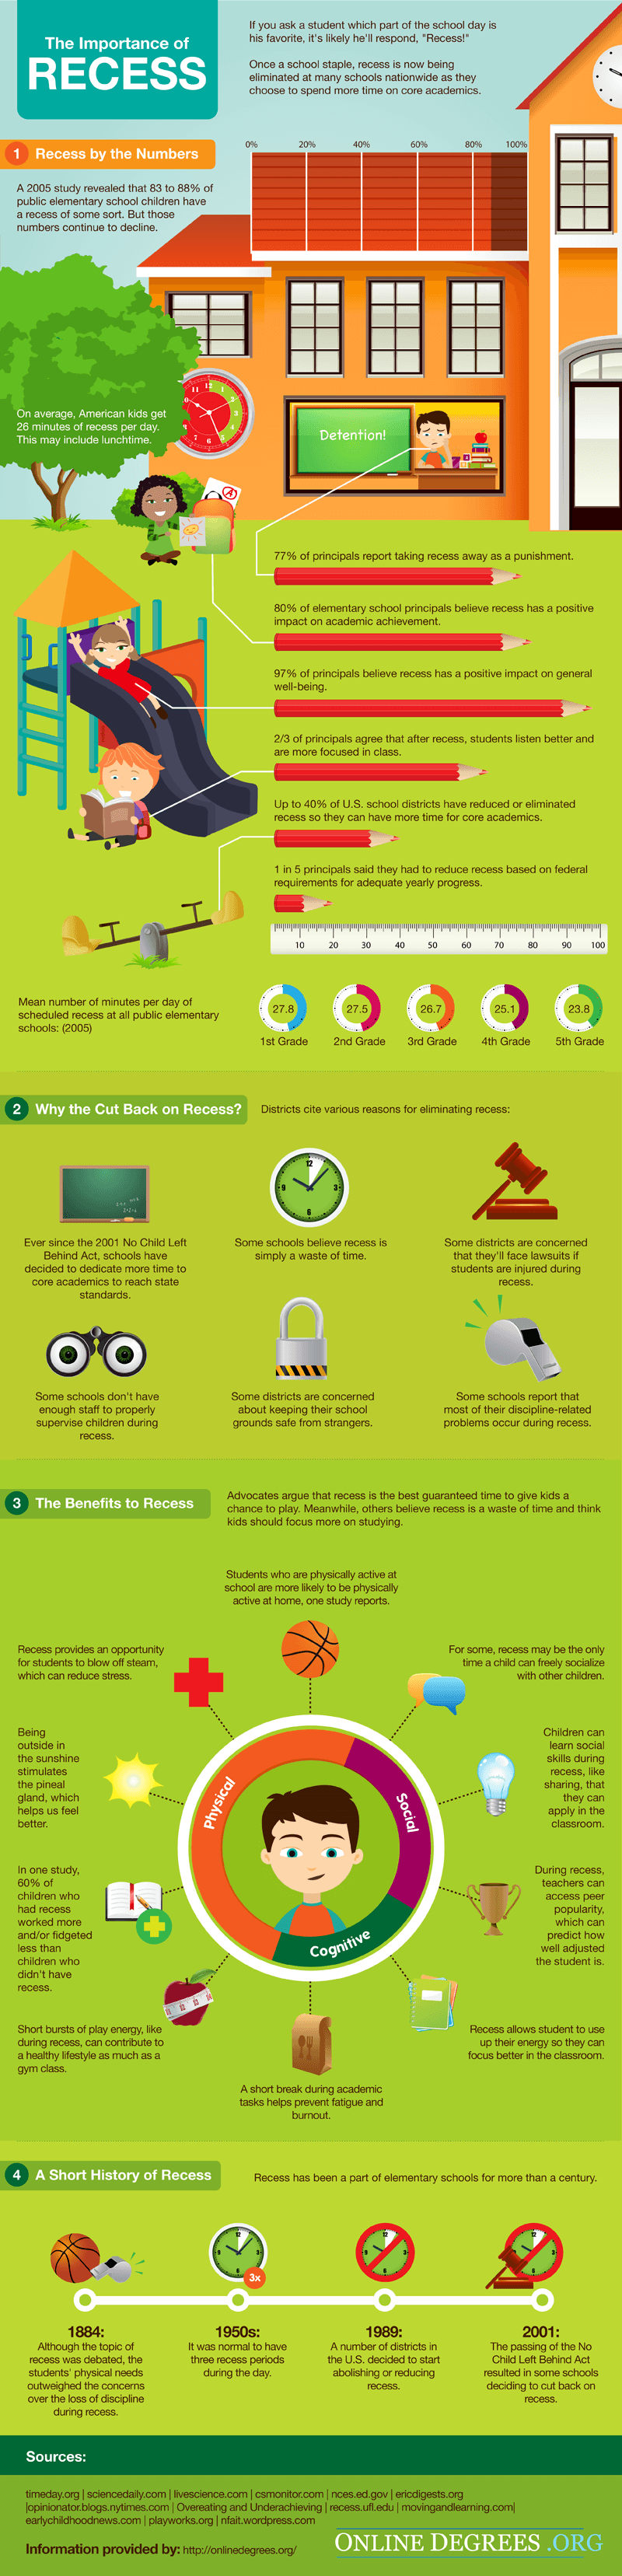 The Importance of Recess Infographic